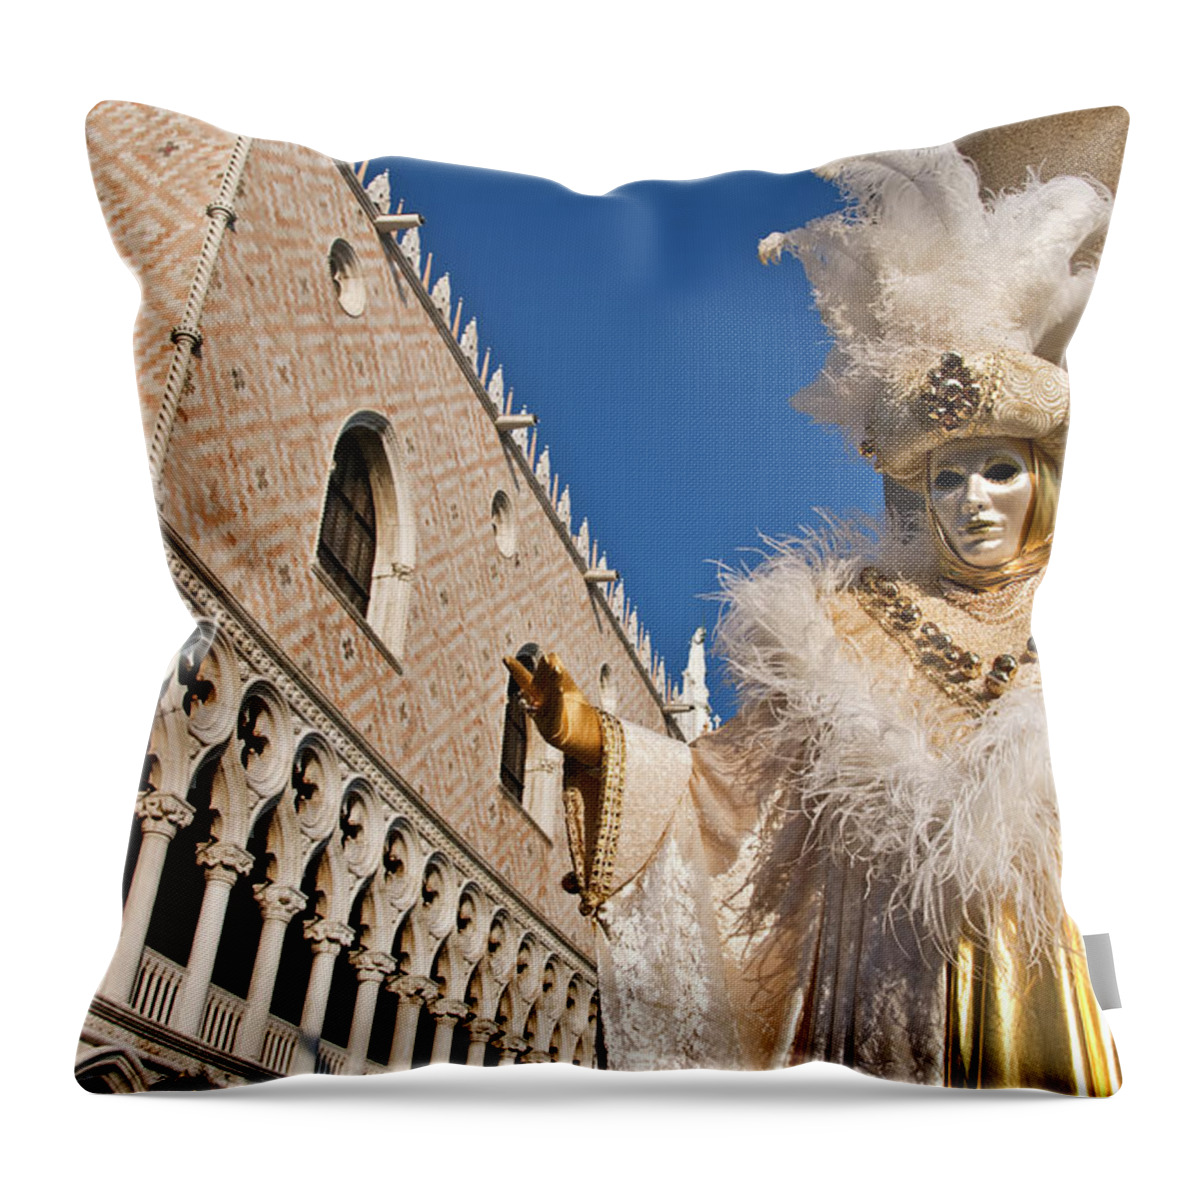 Tranquility Throw Pillow featuring the photograph Venice Carnival by Pubblimage Di Davide Cau